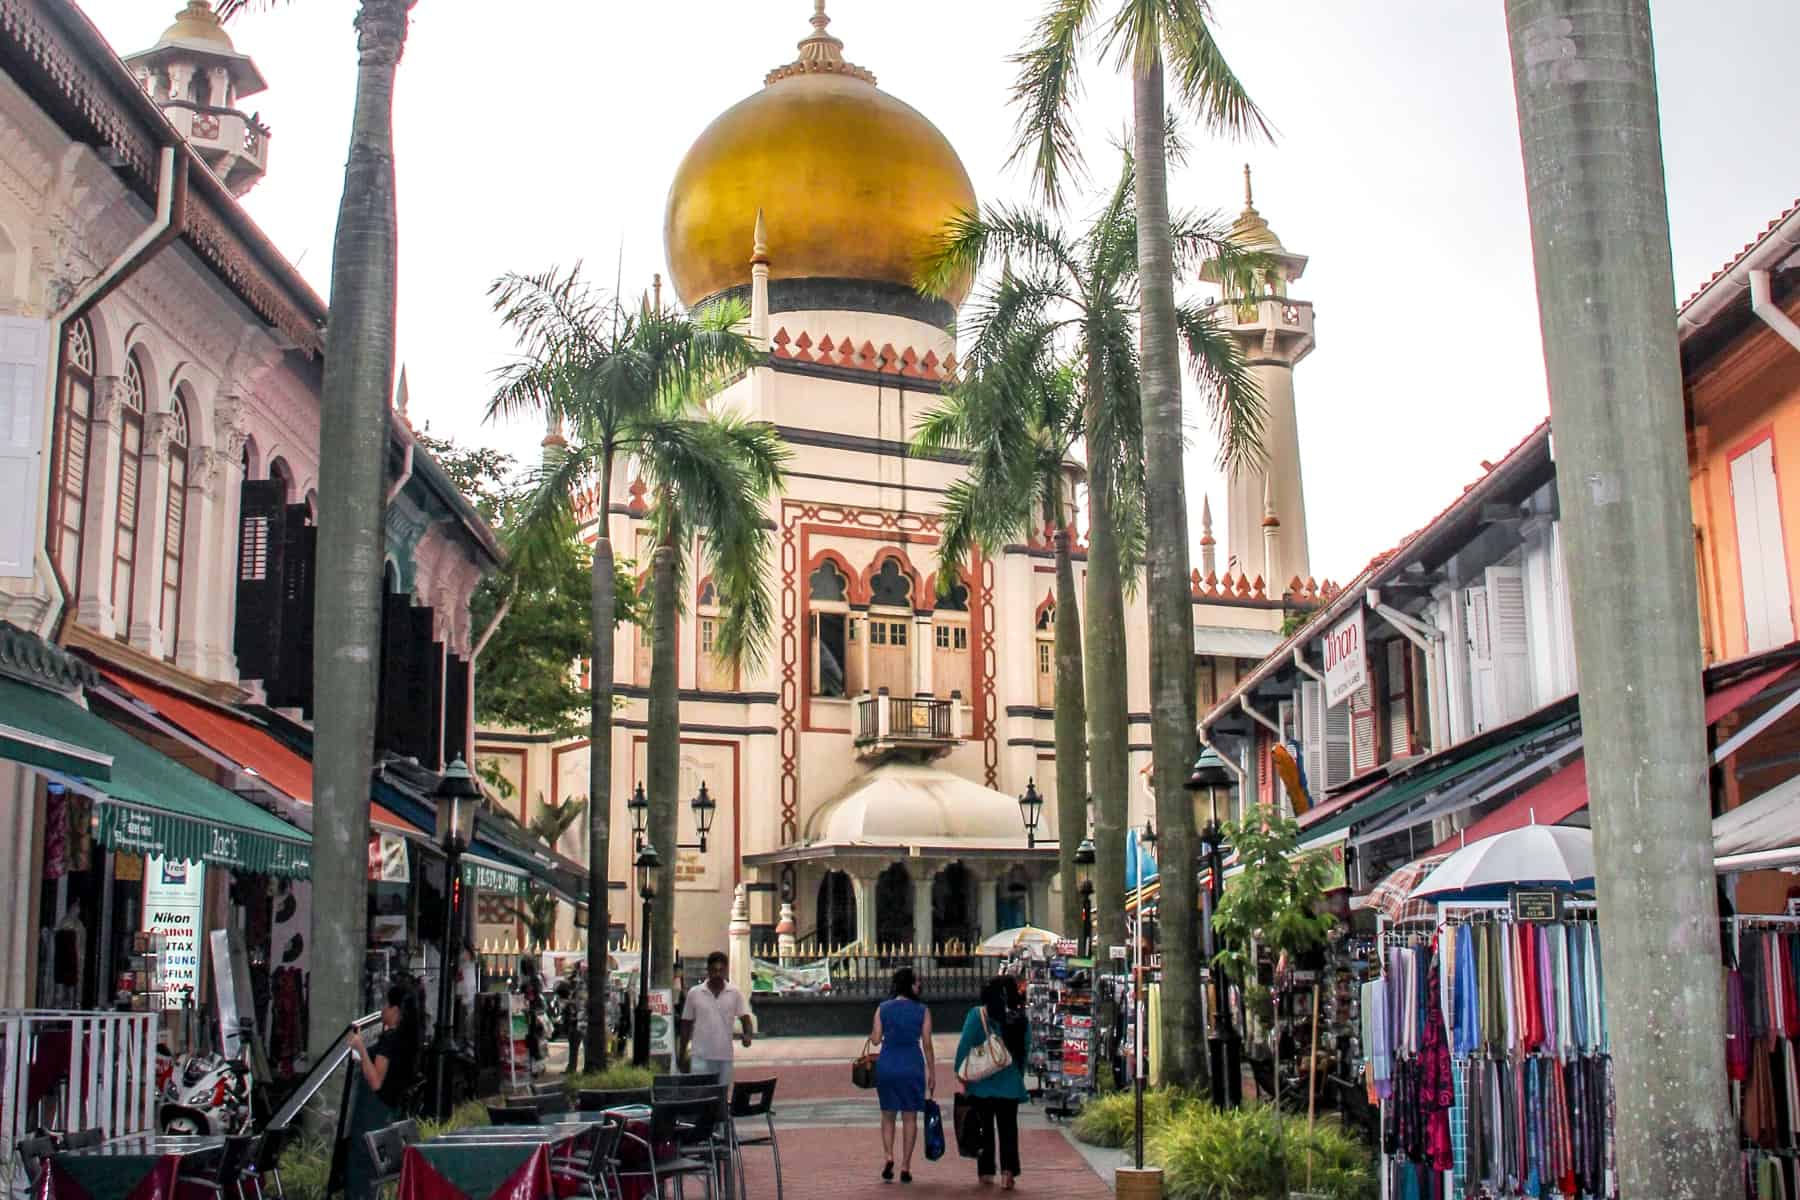 The gleaming cream exterior and gold onion shaped roof of the Masjid Sultan Mosque in Singapore that sits at the end of a shop and tree-lined street